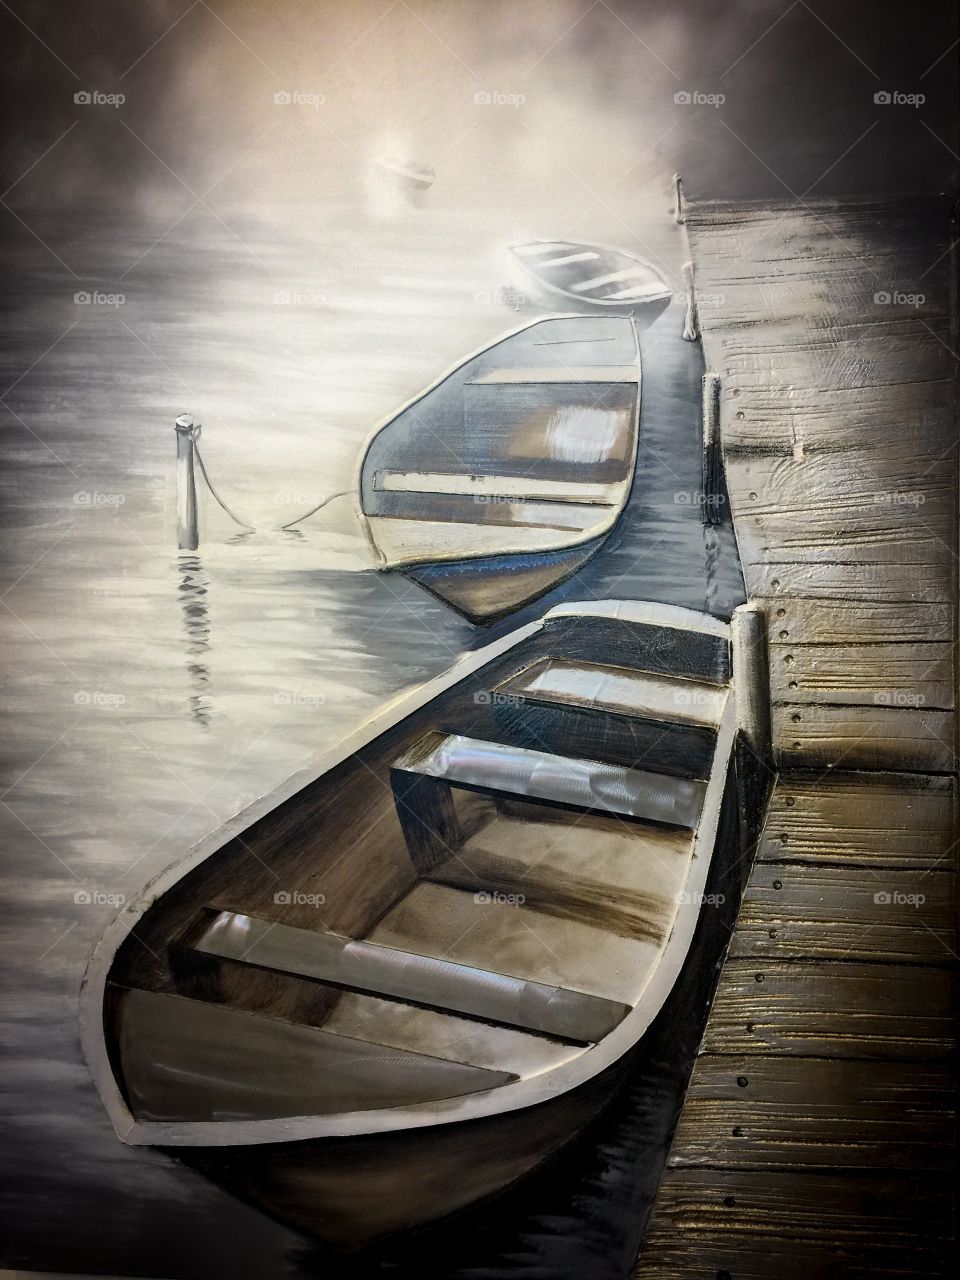 Image of painting of boats